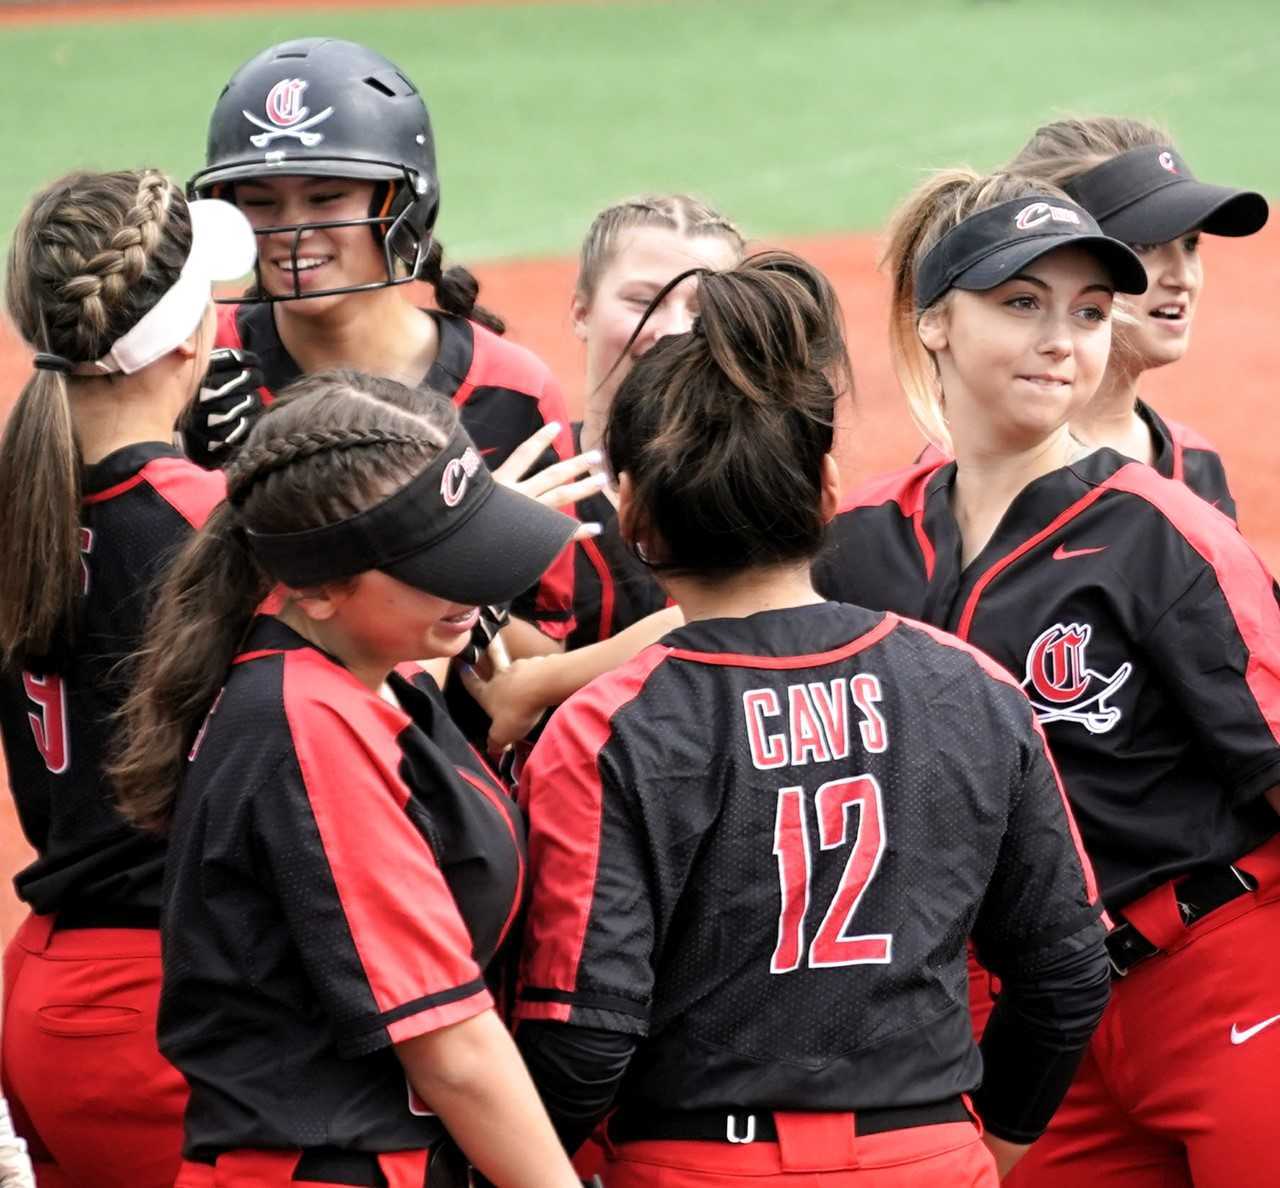 Clackamas players celebrate with Alyssa Daniell (helmet) after one of her two home runs. (Photo by Jon Olson)